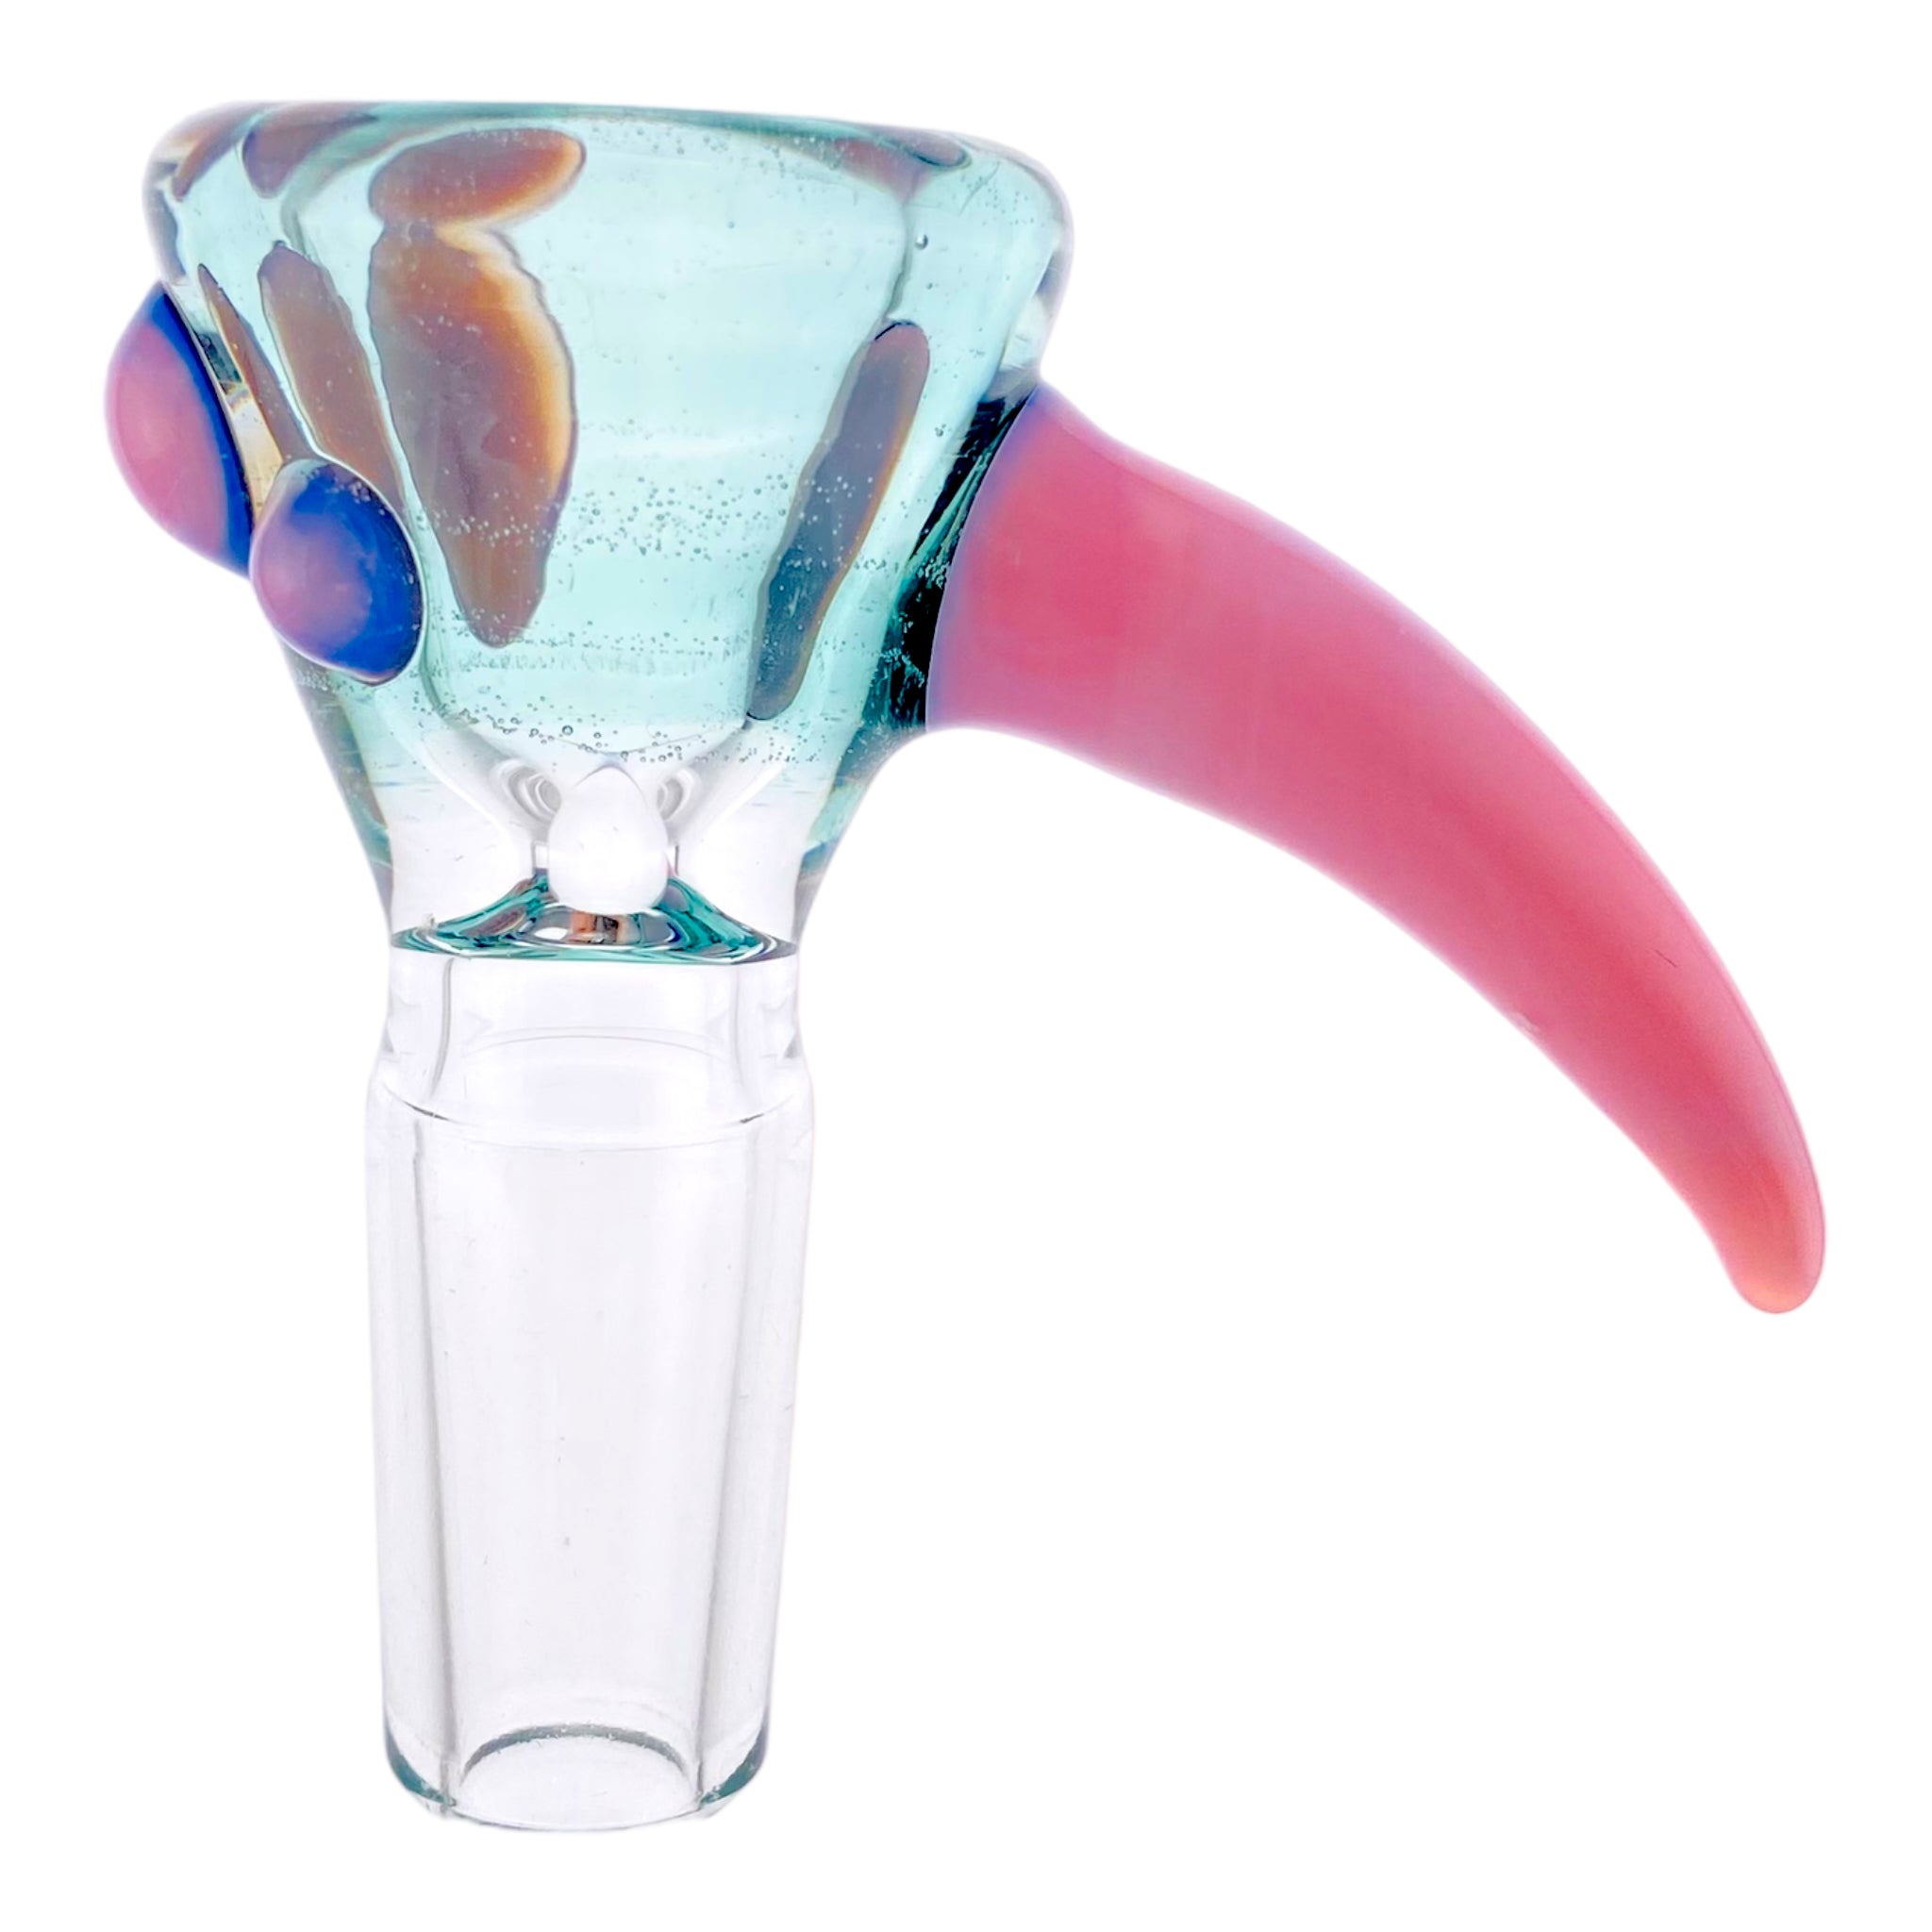 Arko Glass - 14mm Flower Bowl - Tonic Blue Bowl With Pink Handle